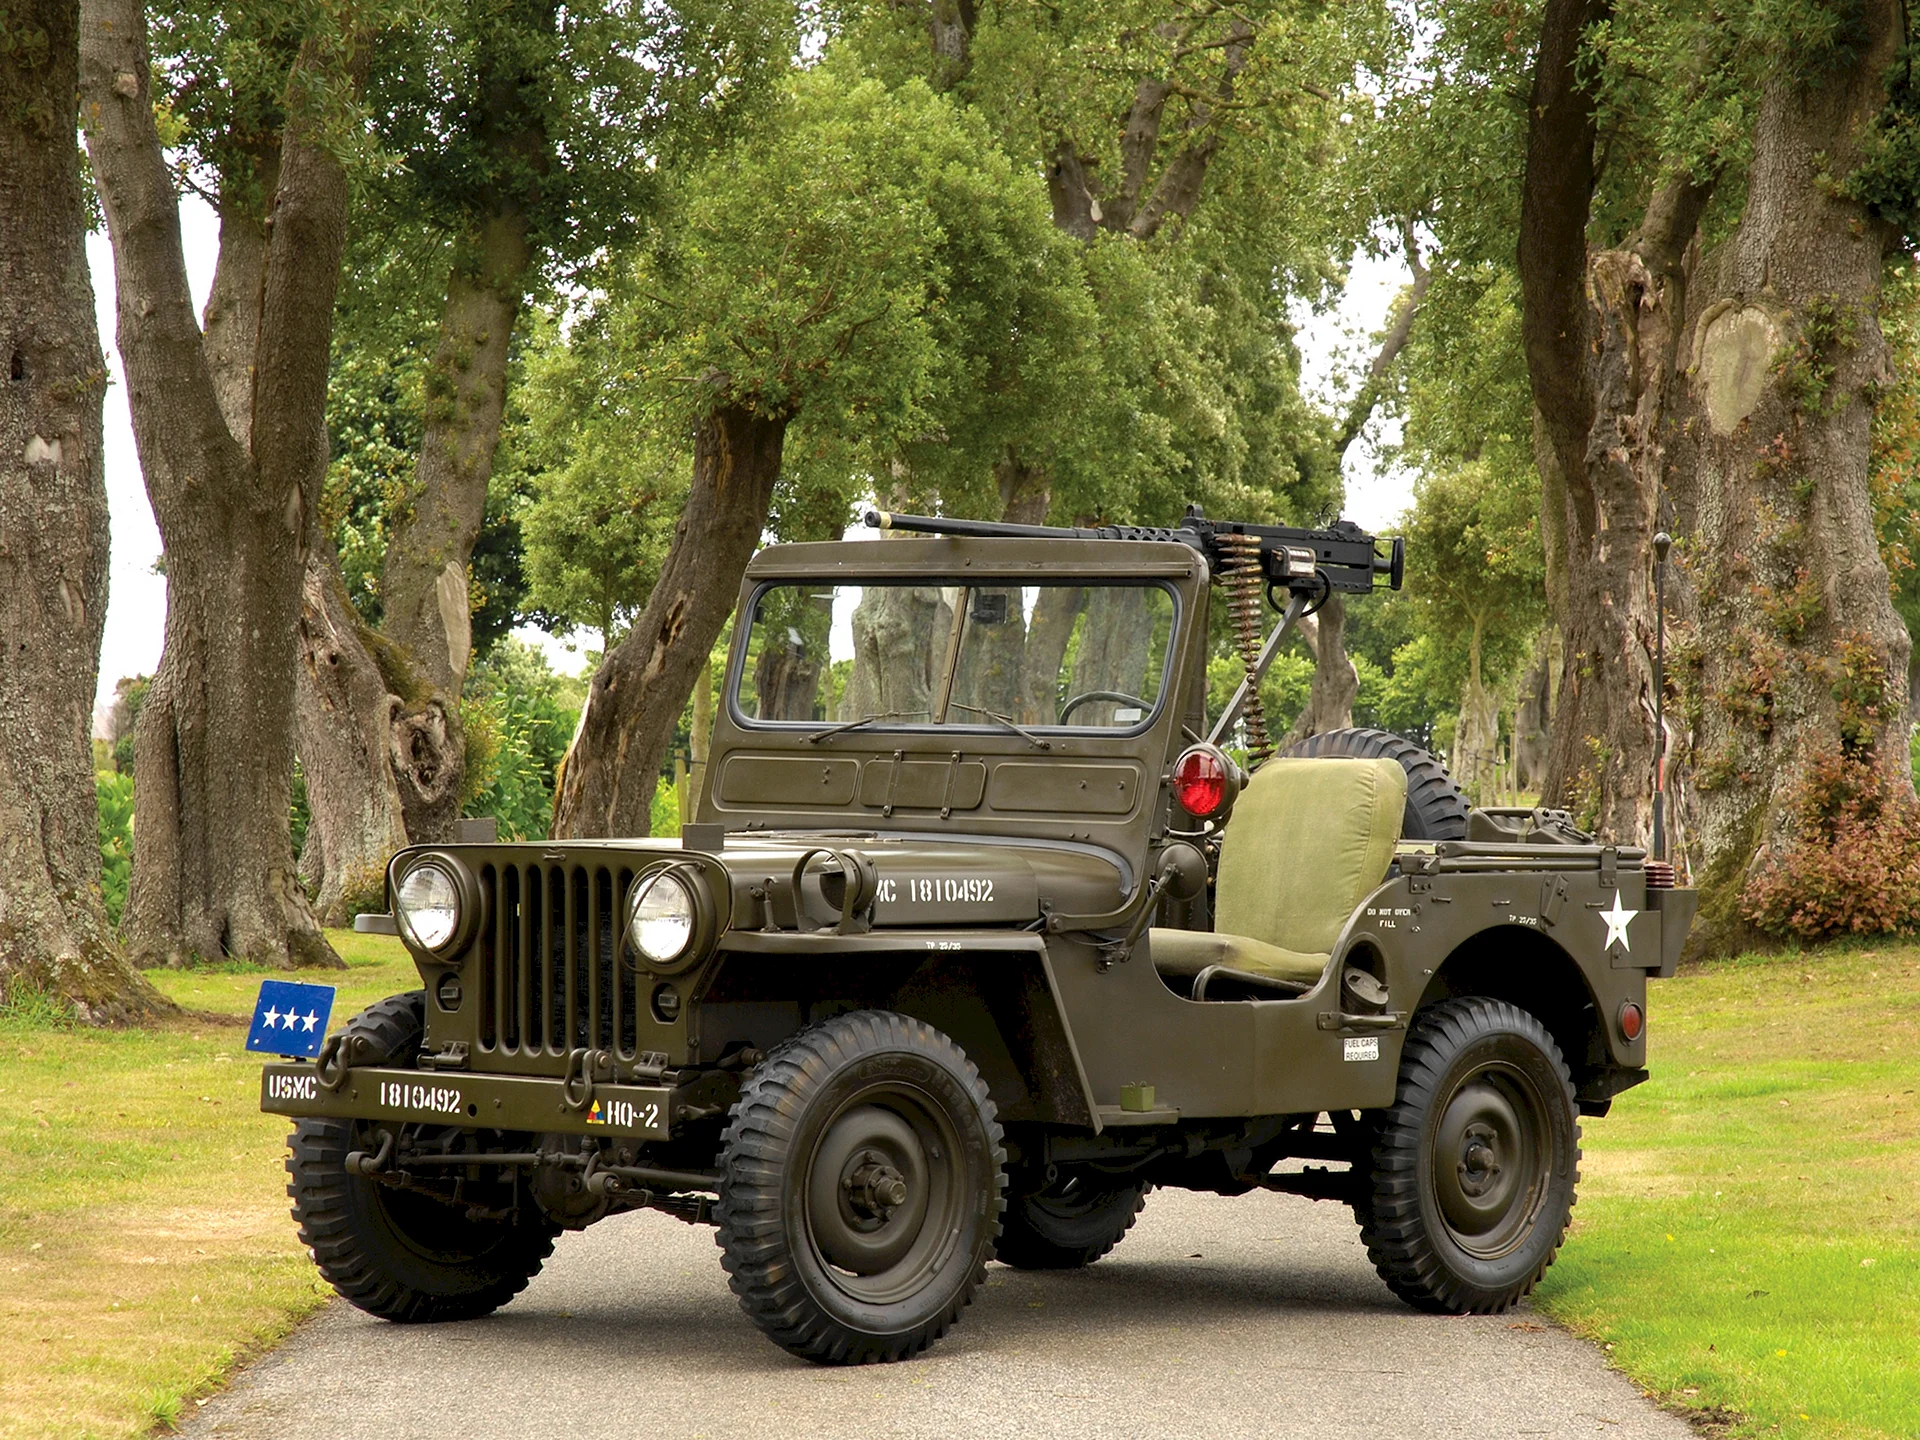 Willys M38 Jeep Wallpaper